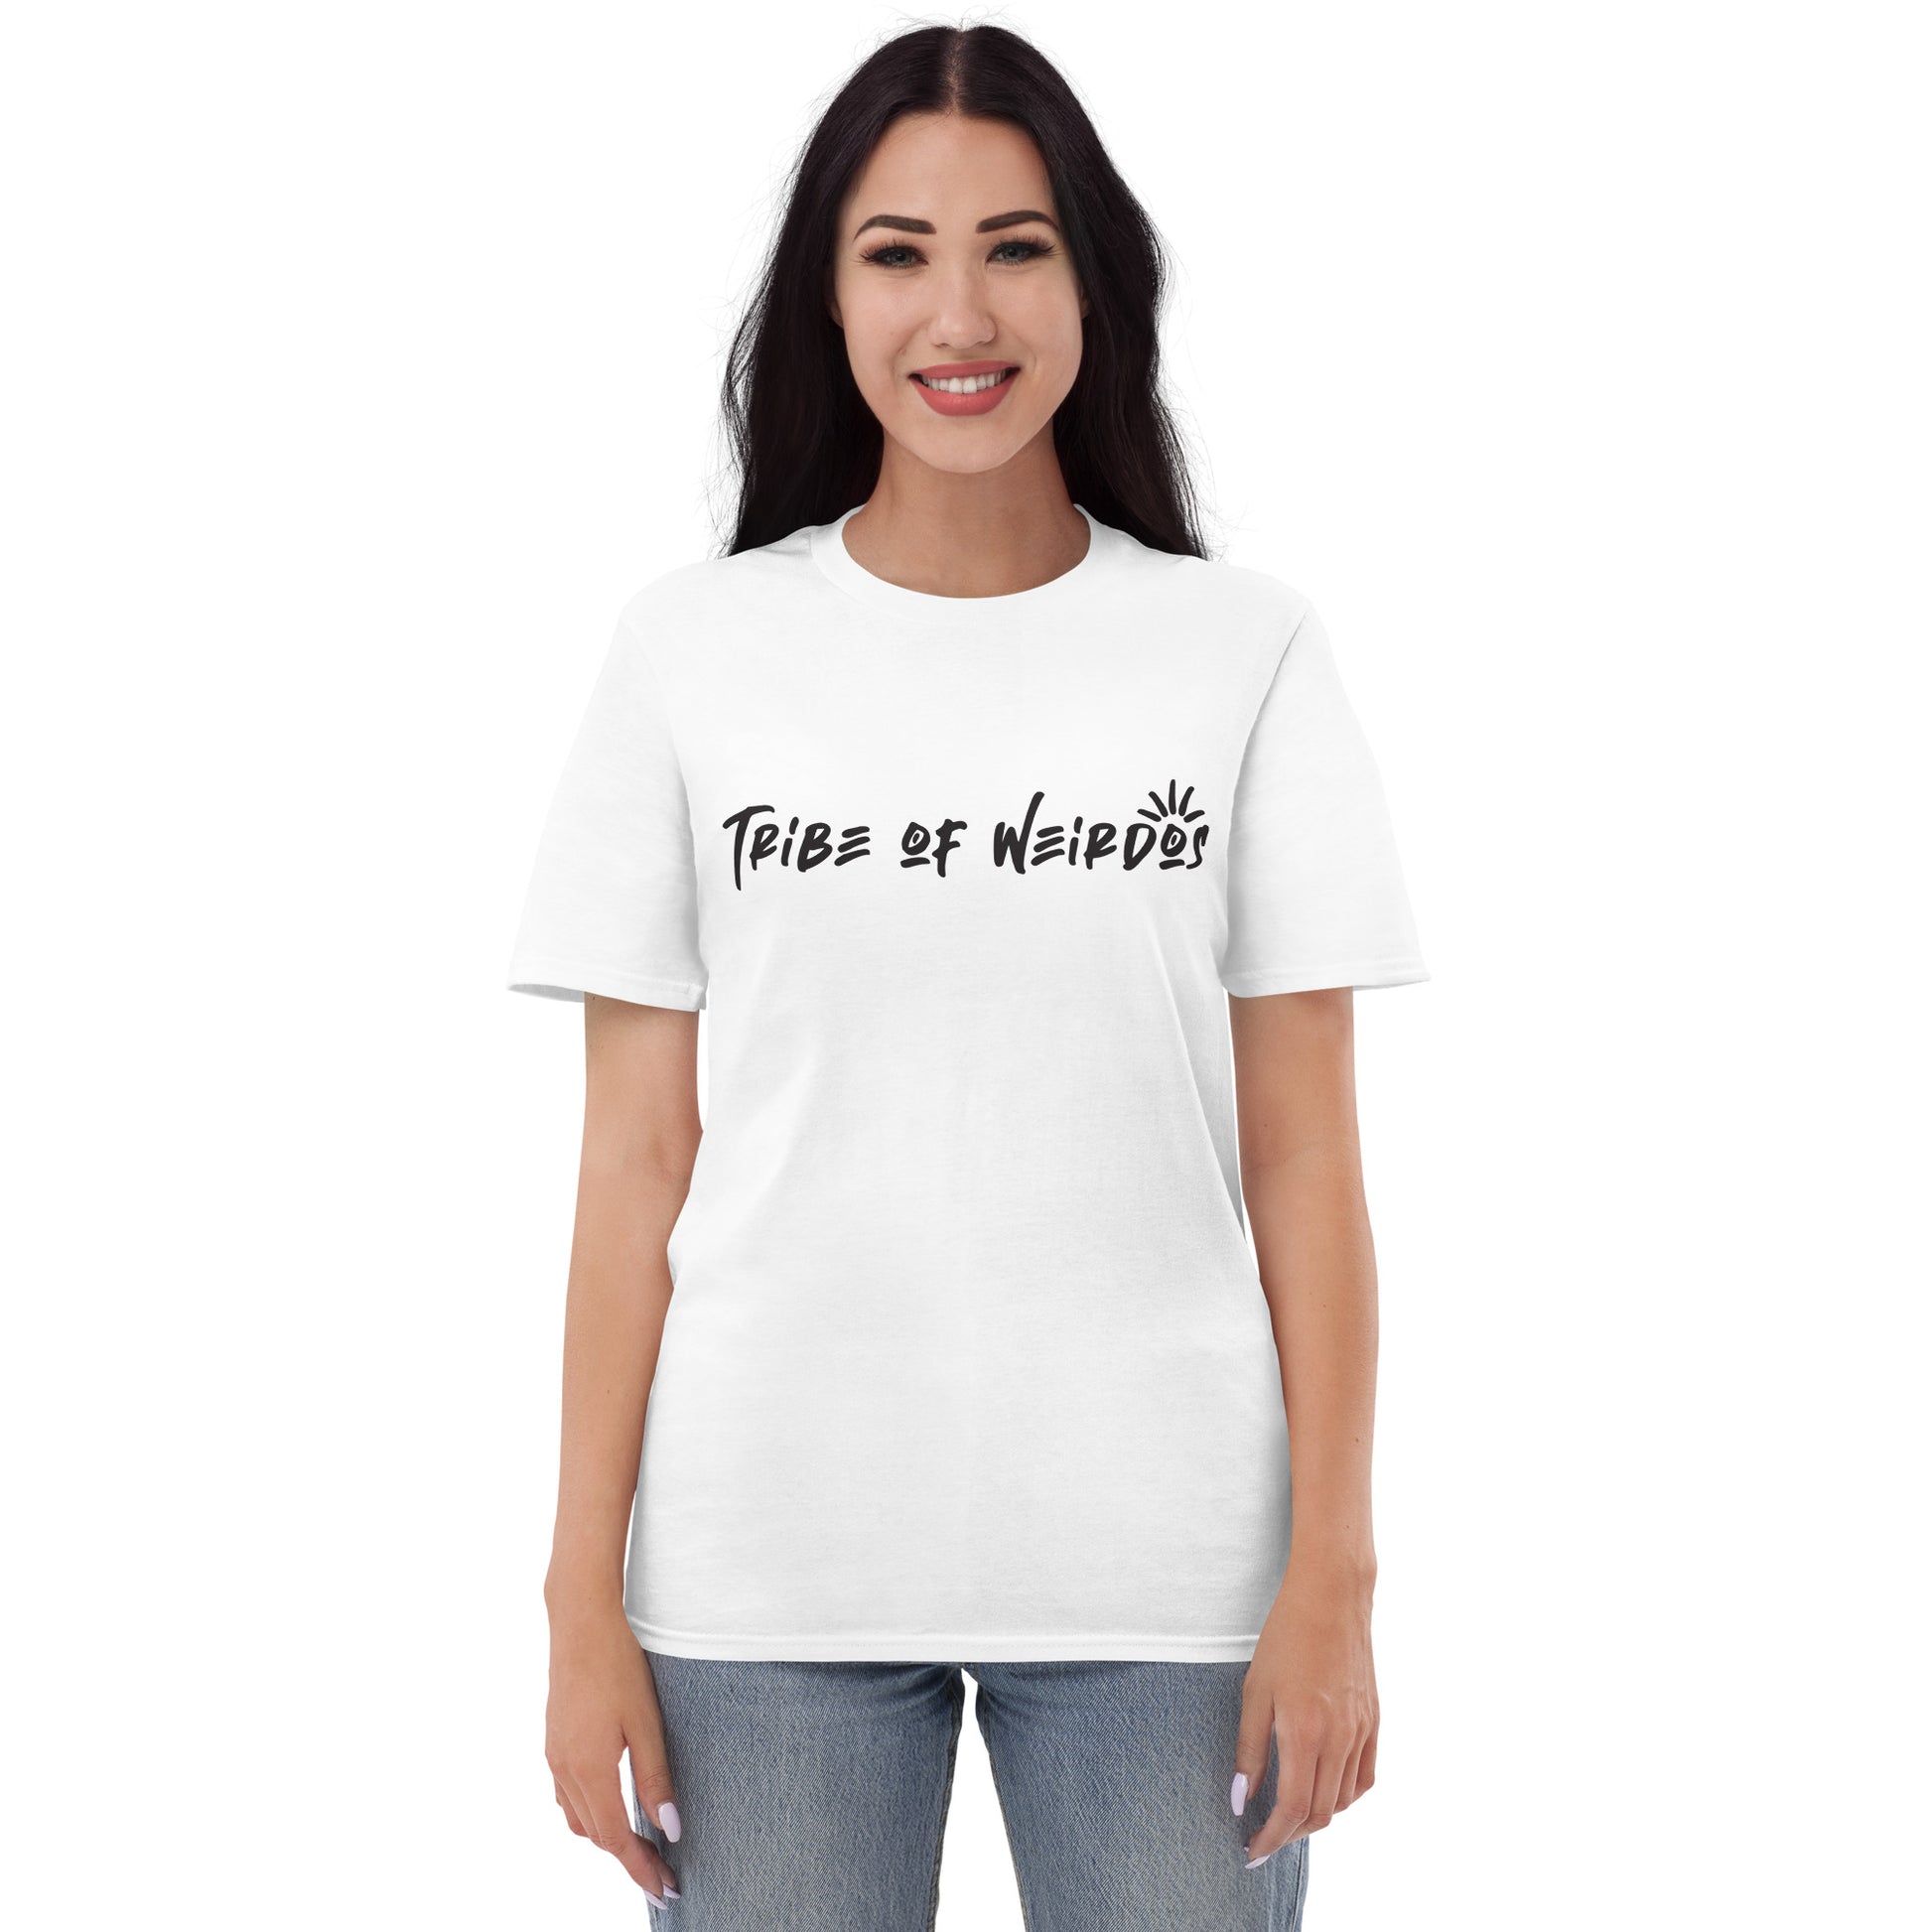 Impactful 'If It Costs You Your Peace, It Is Way Too Expensive' T-Shirt from Tribe of Weirdos, advocating for peace over price.